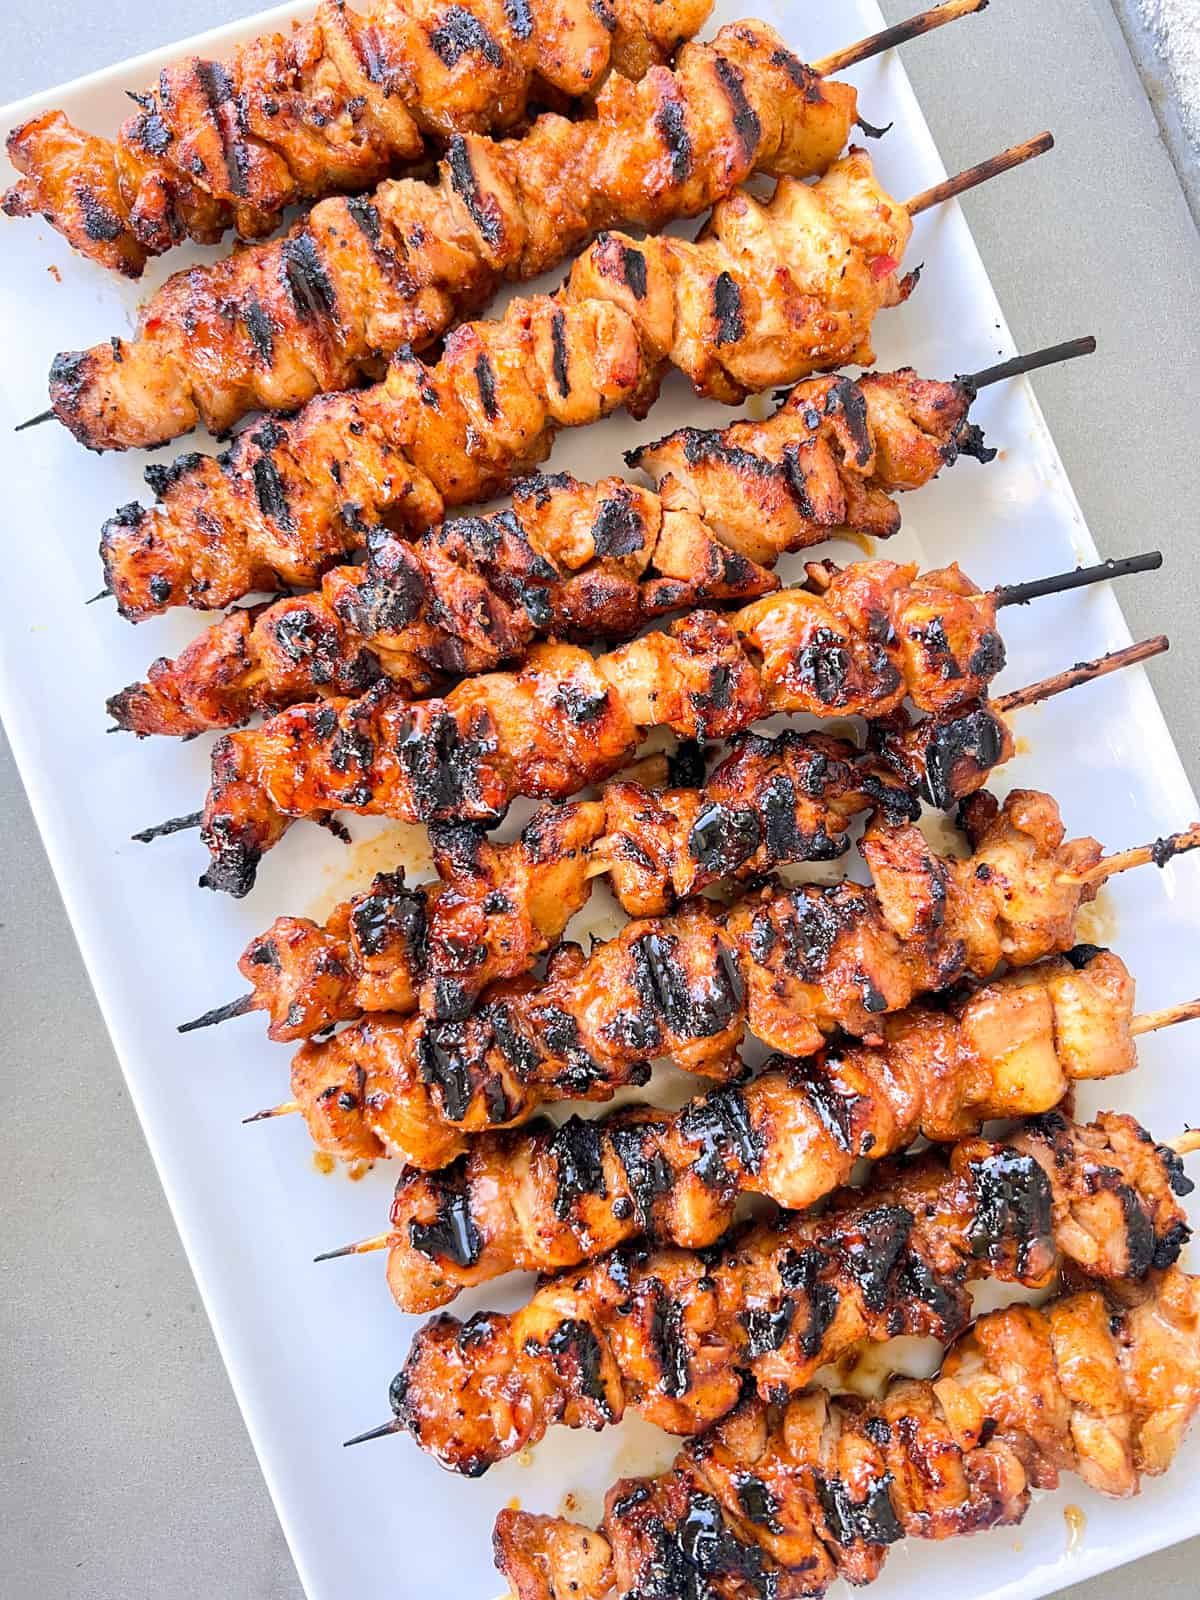 Grilled chicken skewers on white plate.